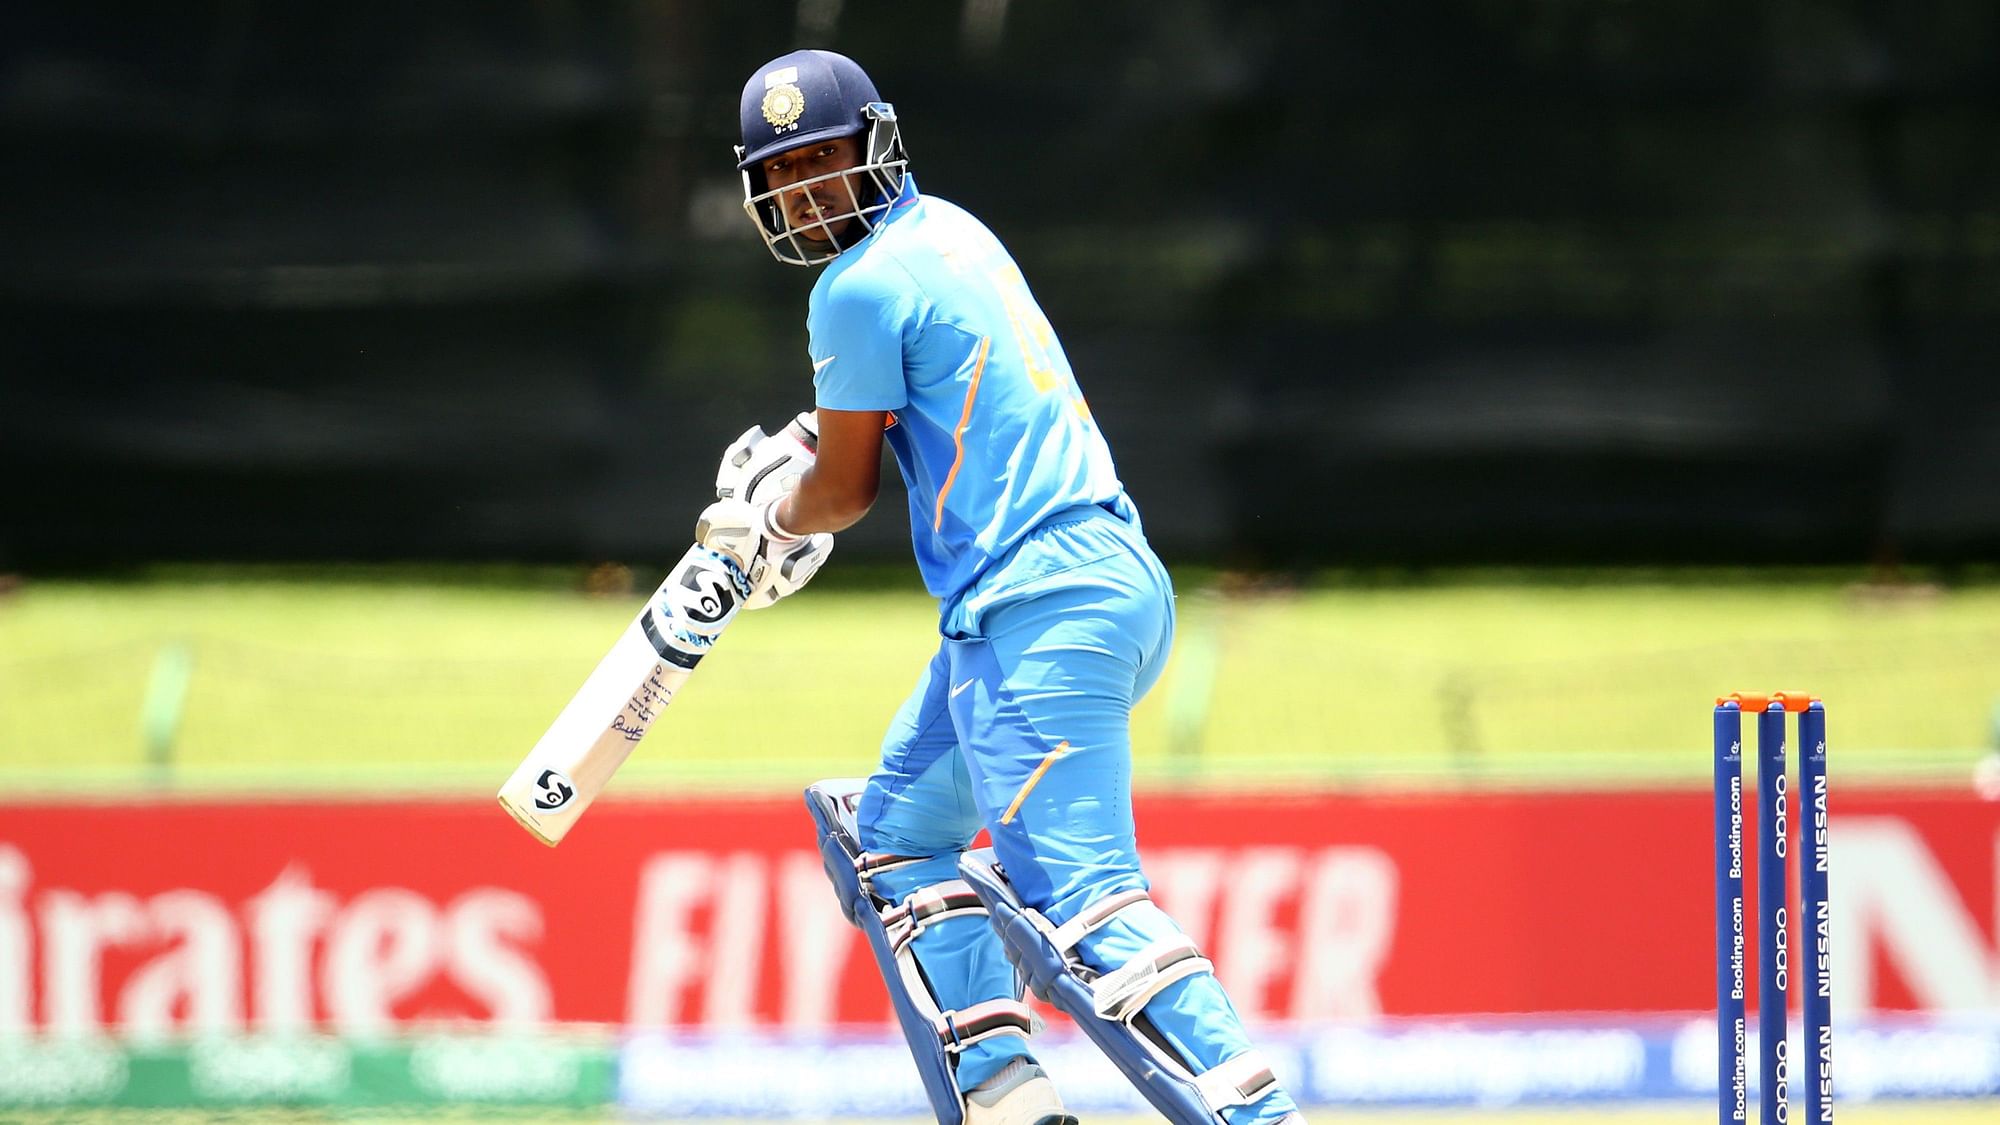 India entered the semifinals of the ICC U-19 World Cup with a comfortable 74-run win against Australia on Tuesday, 28 January.